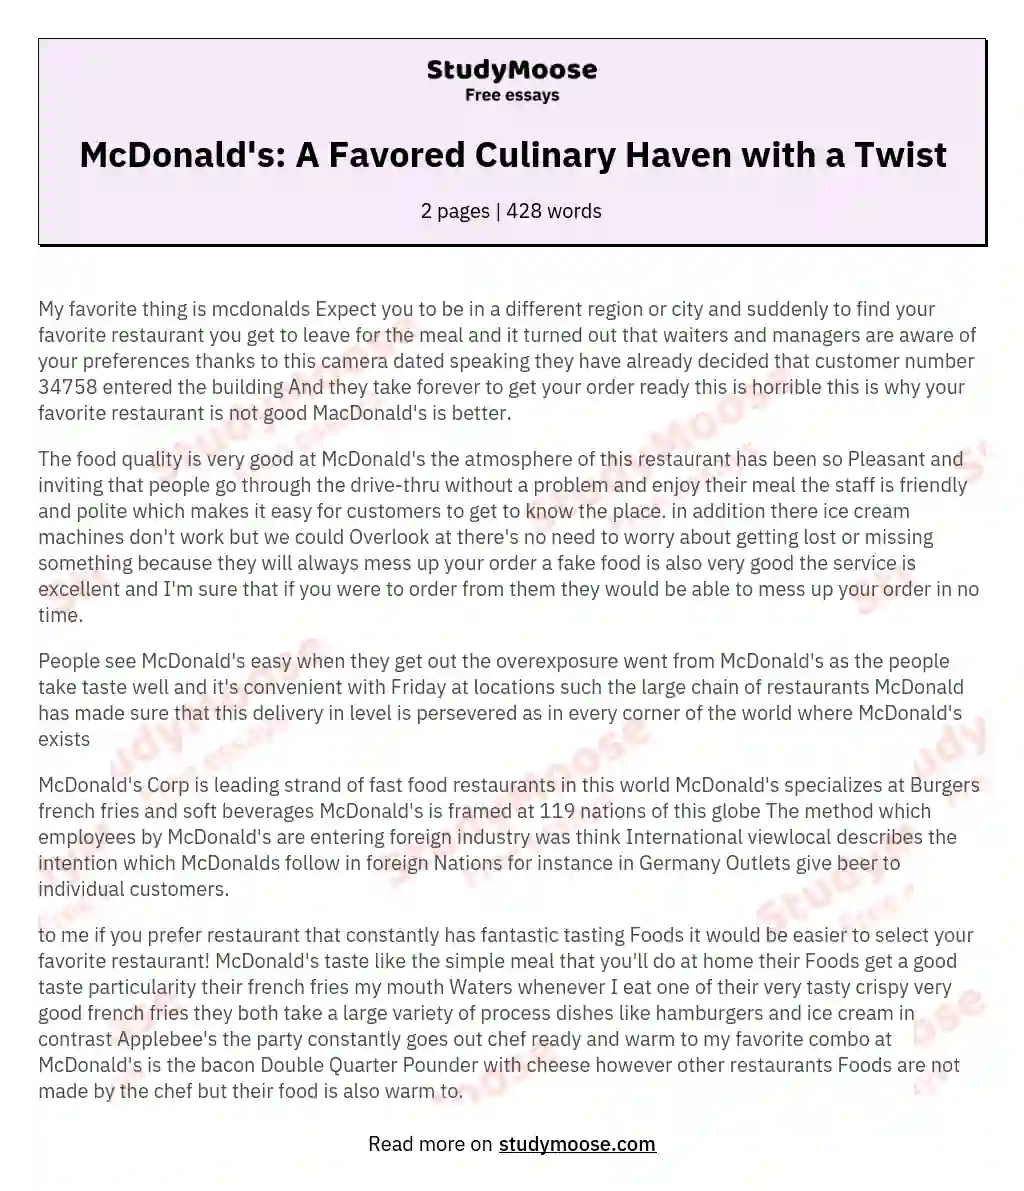 McDonald's: A Favored Culinary Haven with a Twist essay